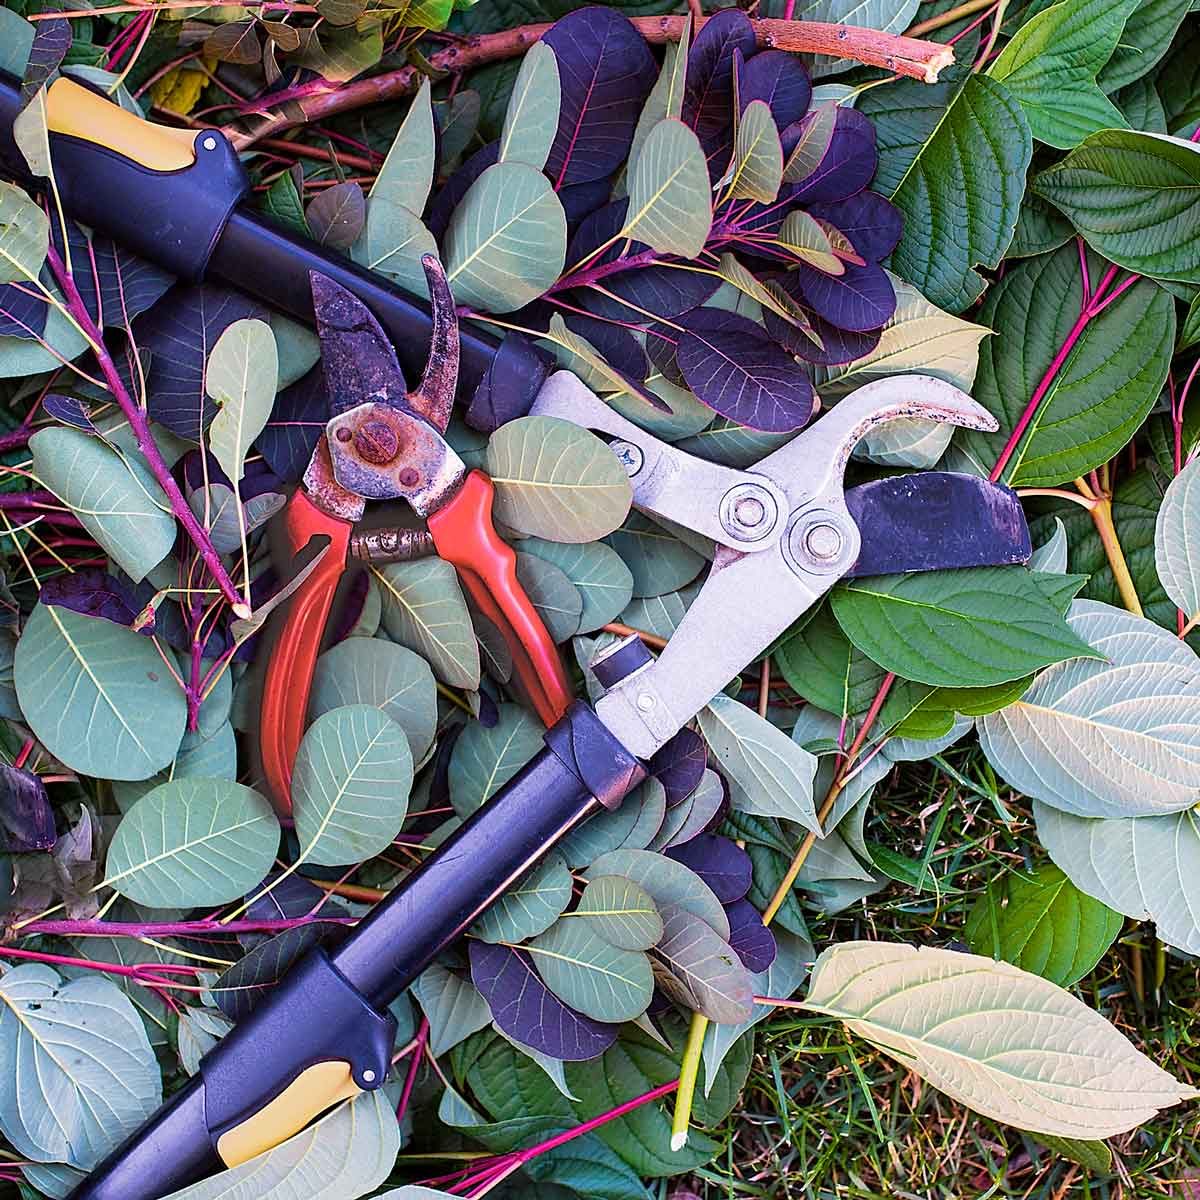 Essential Tools for Pruning - FineGardening